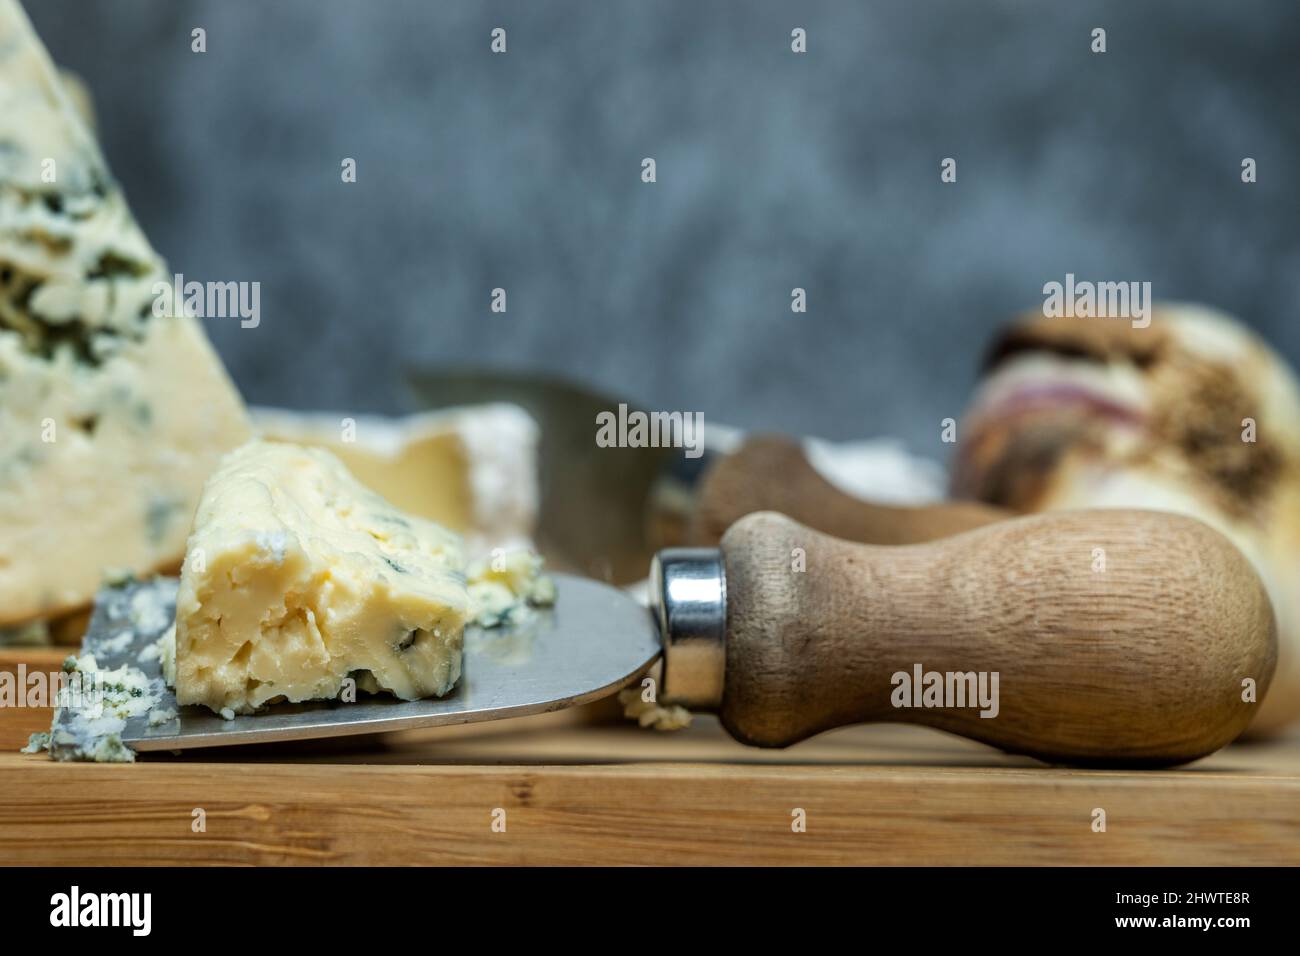 Small cheese knife with a piece of blue cheese ready to sink your teeth into Stock Photo